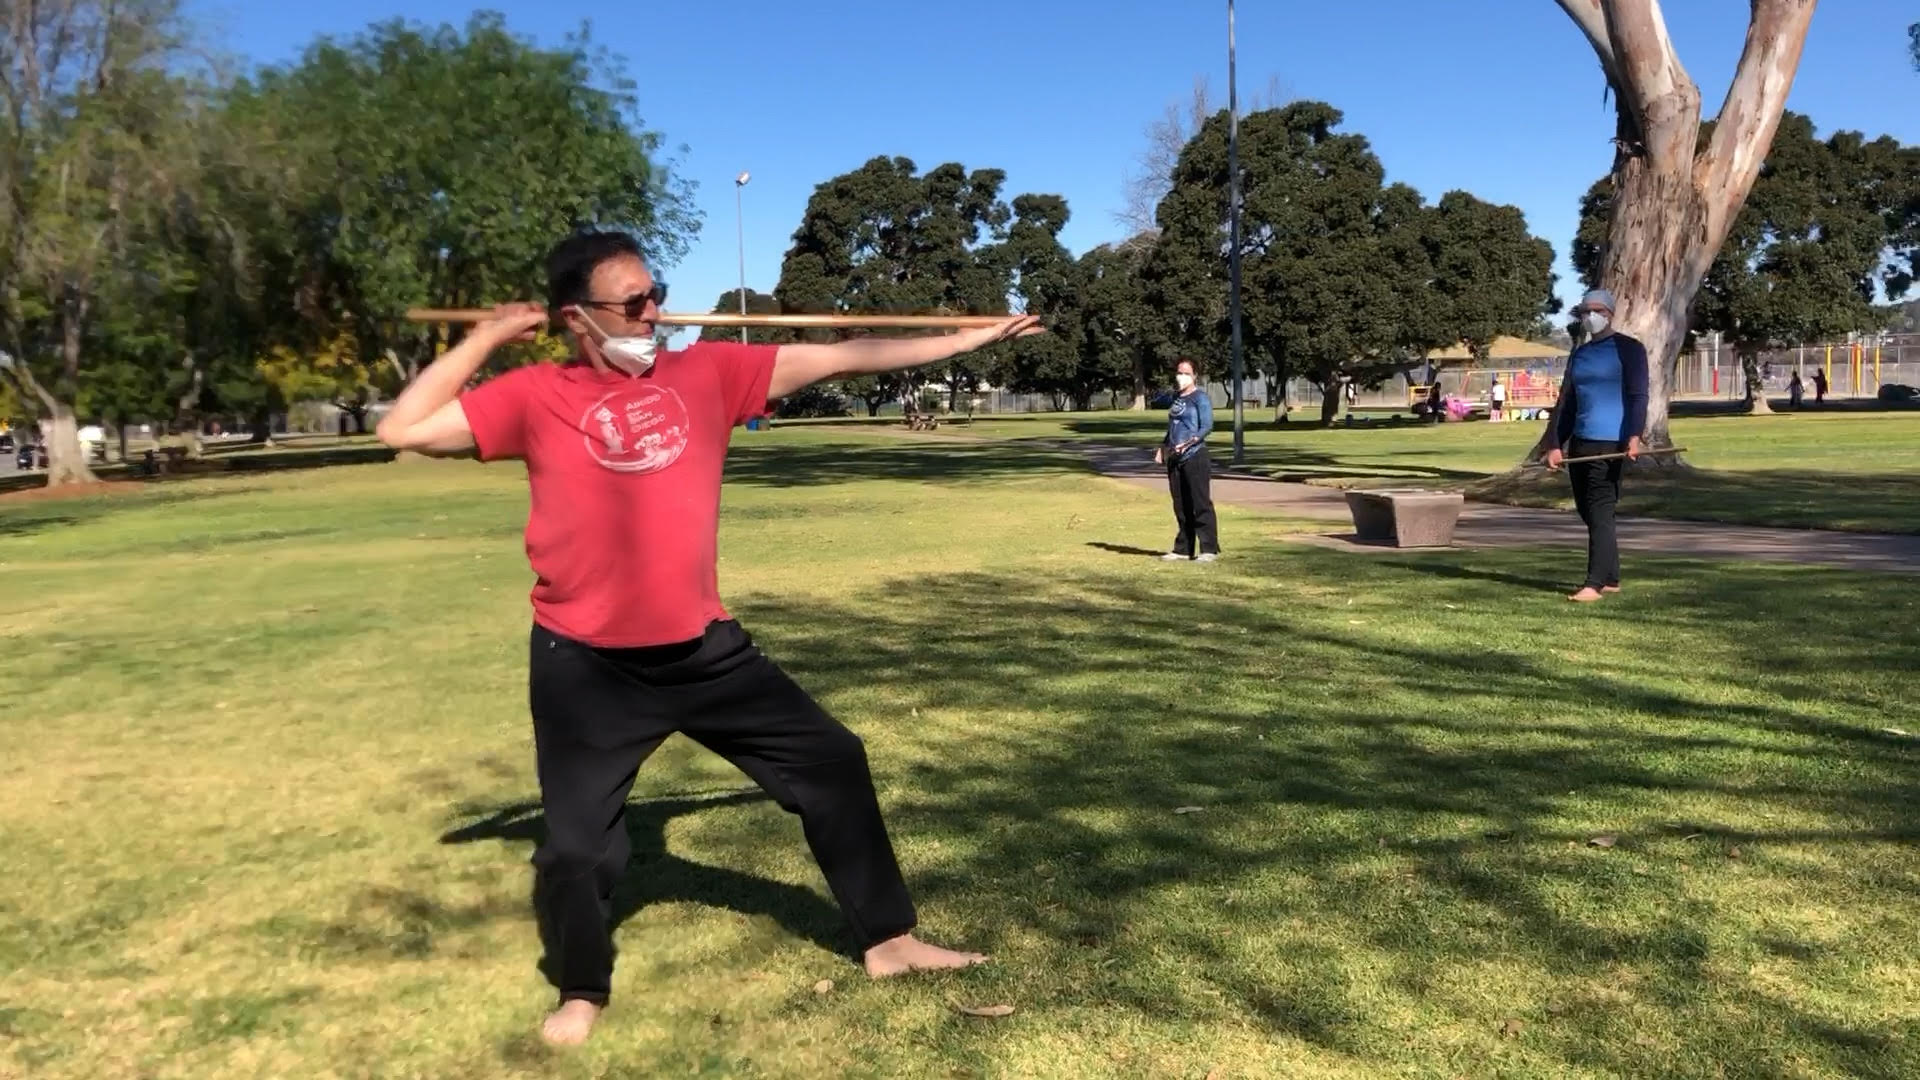 Dave Goldberg Sensei of Aikido of San Diego, teaching one of the jo suburi: katate toma-uchi, outdoors in the park during the Covid pandemic.